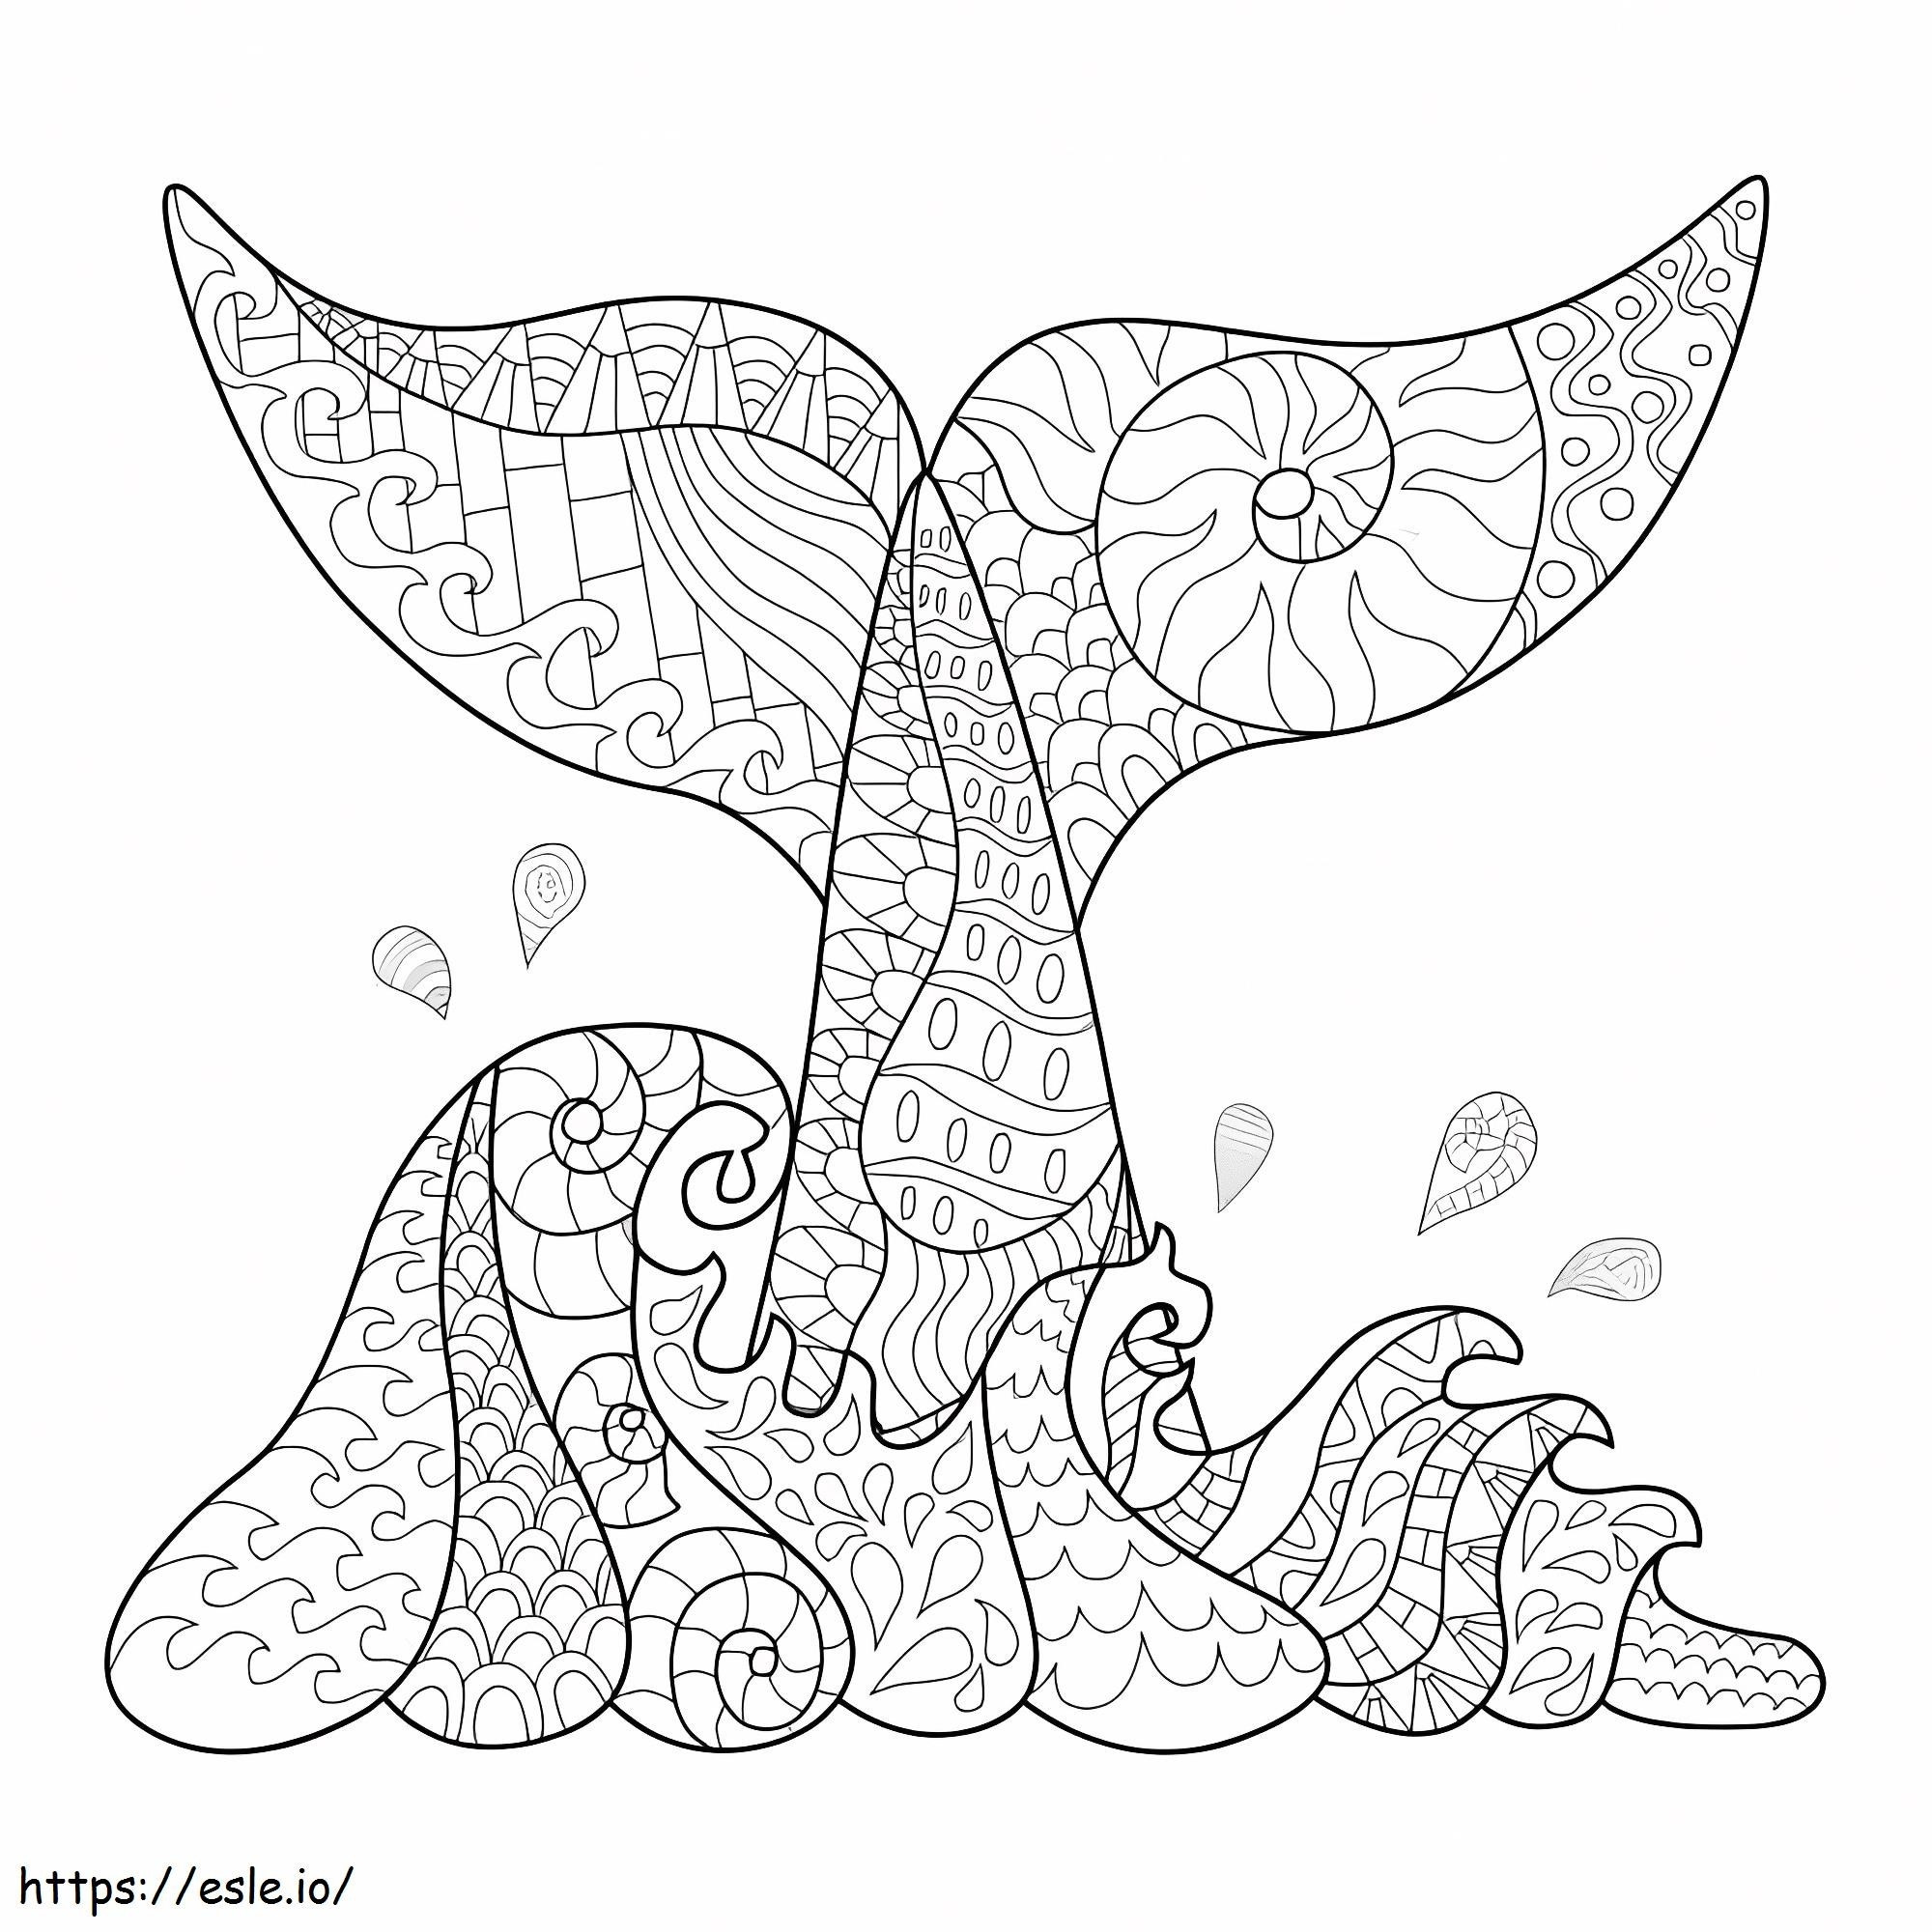 Fantasy Whale coloring page